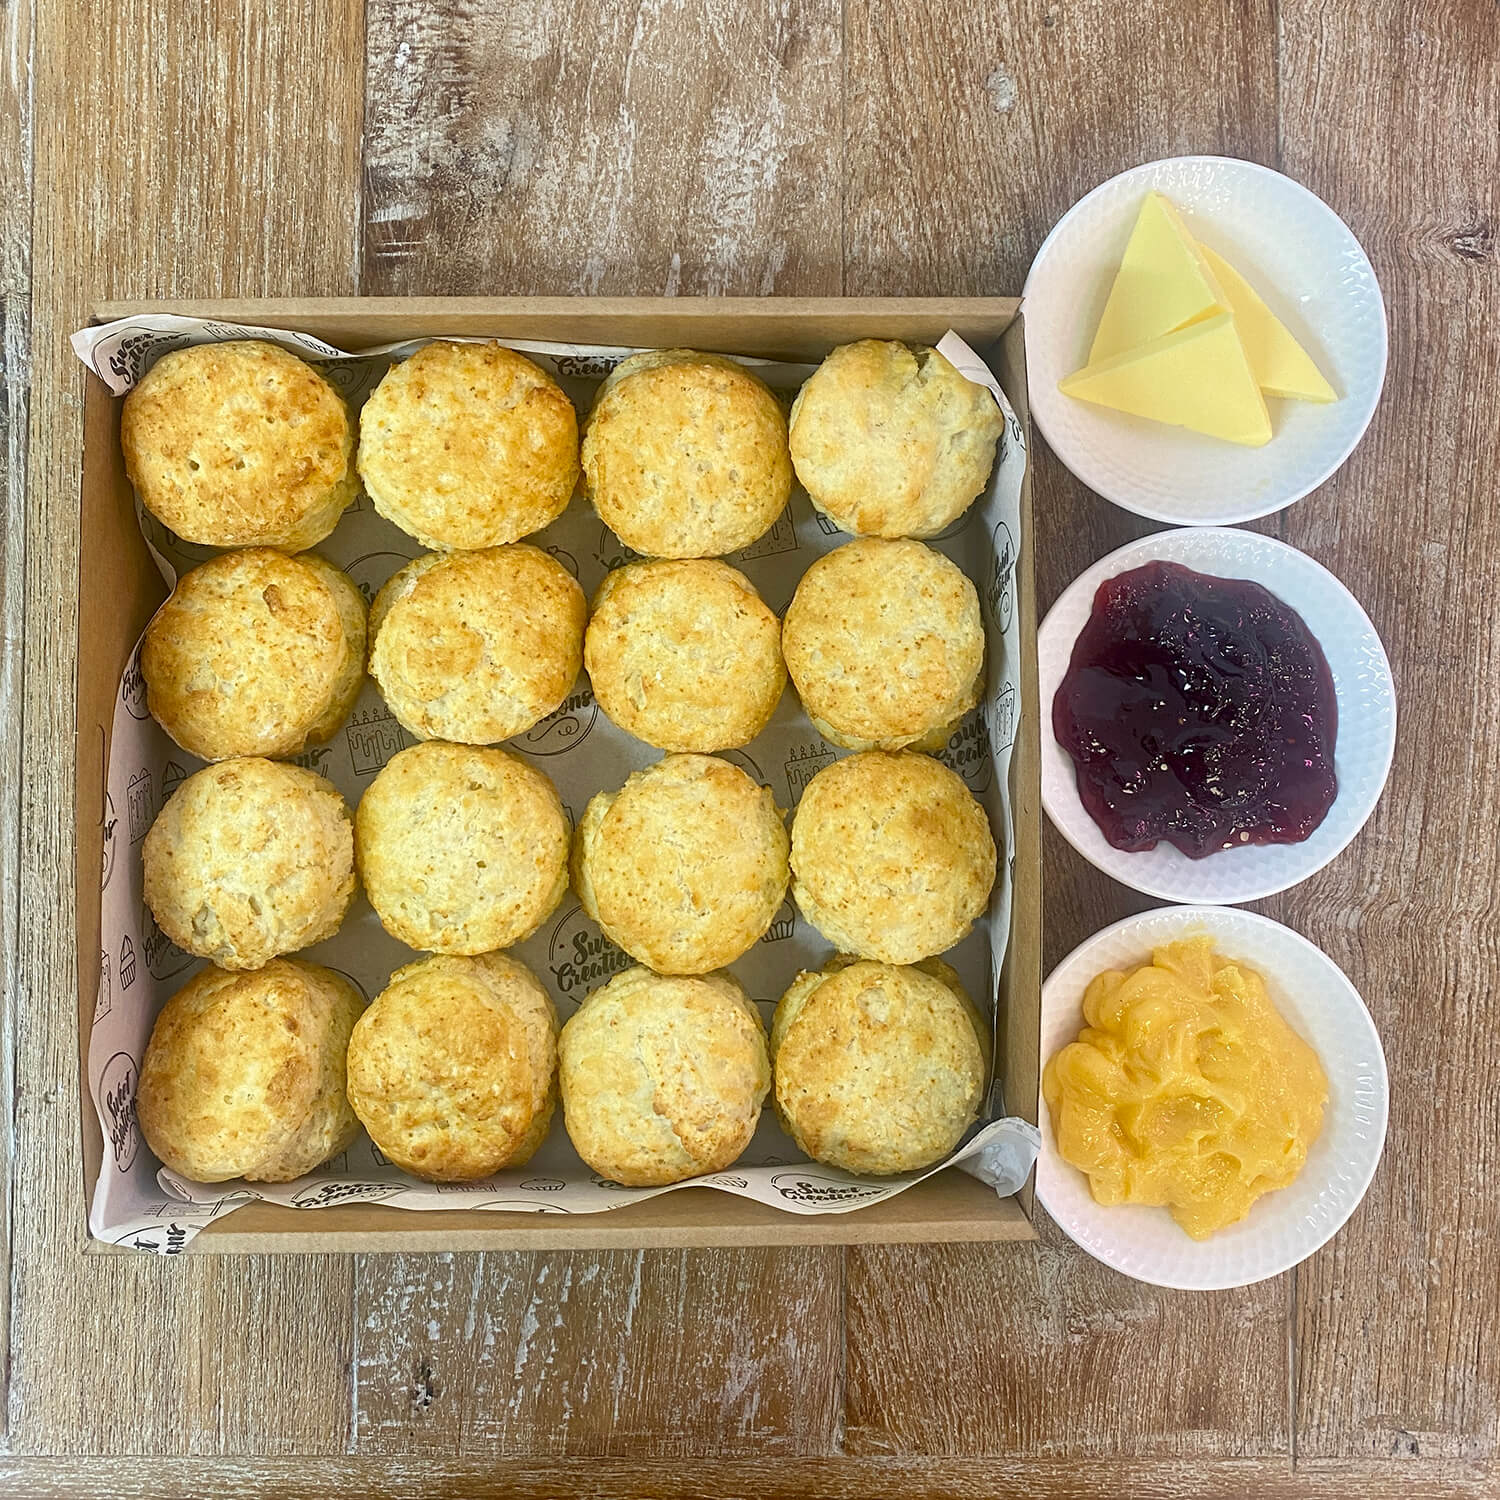 Scone and Topping Box from Sweet Creations in Blenheim, Marlborough, New Zealand